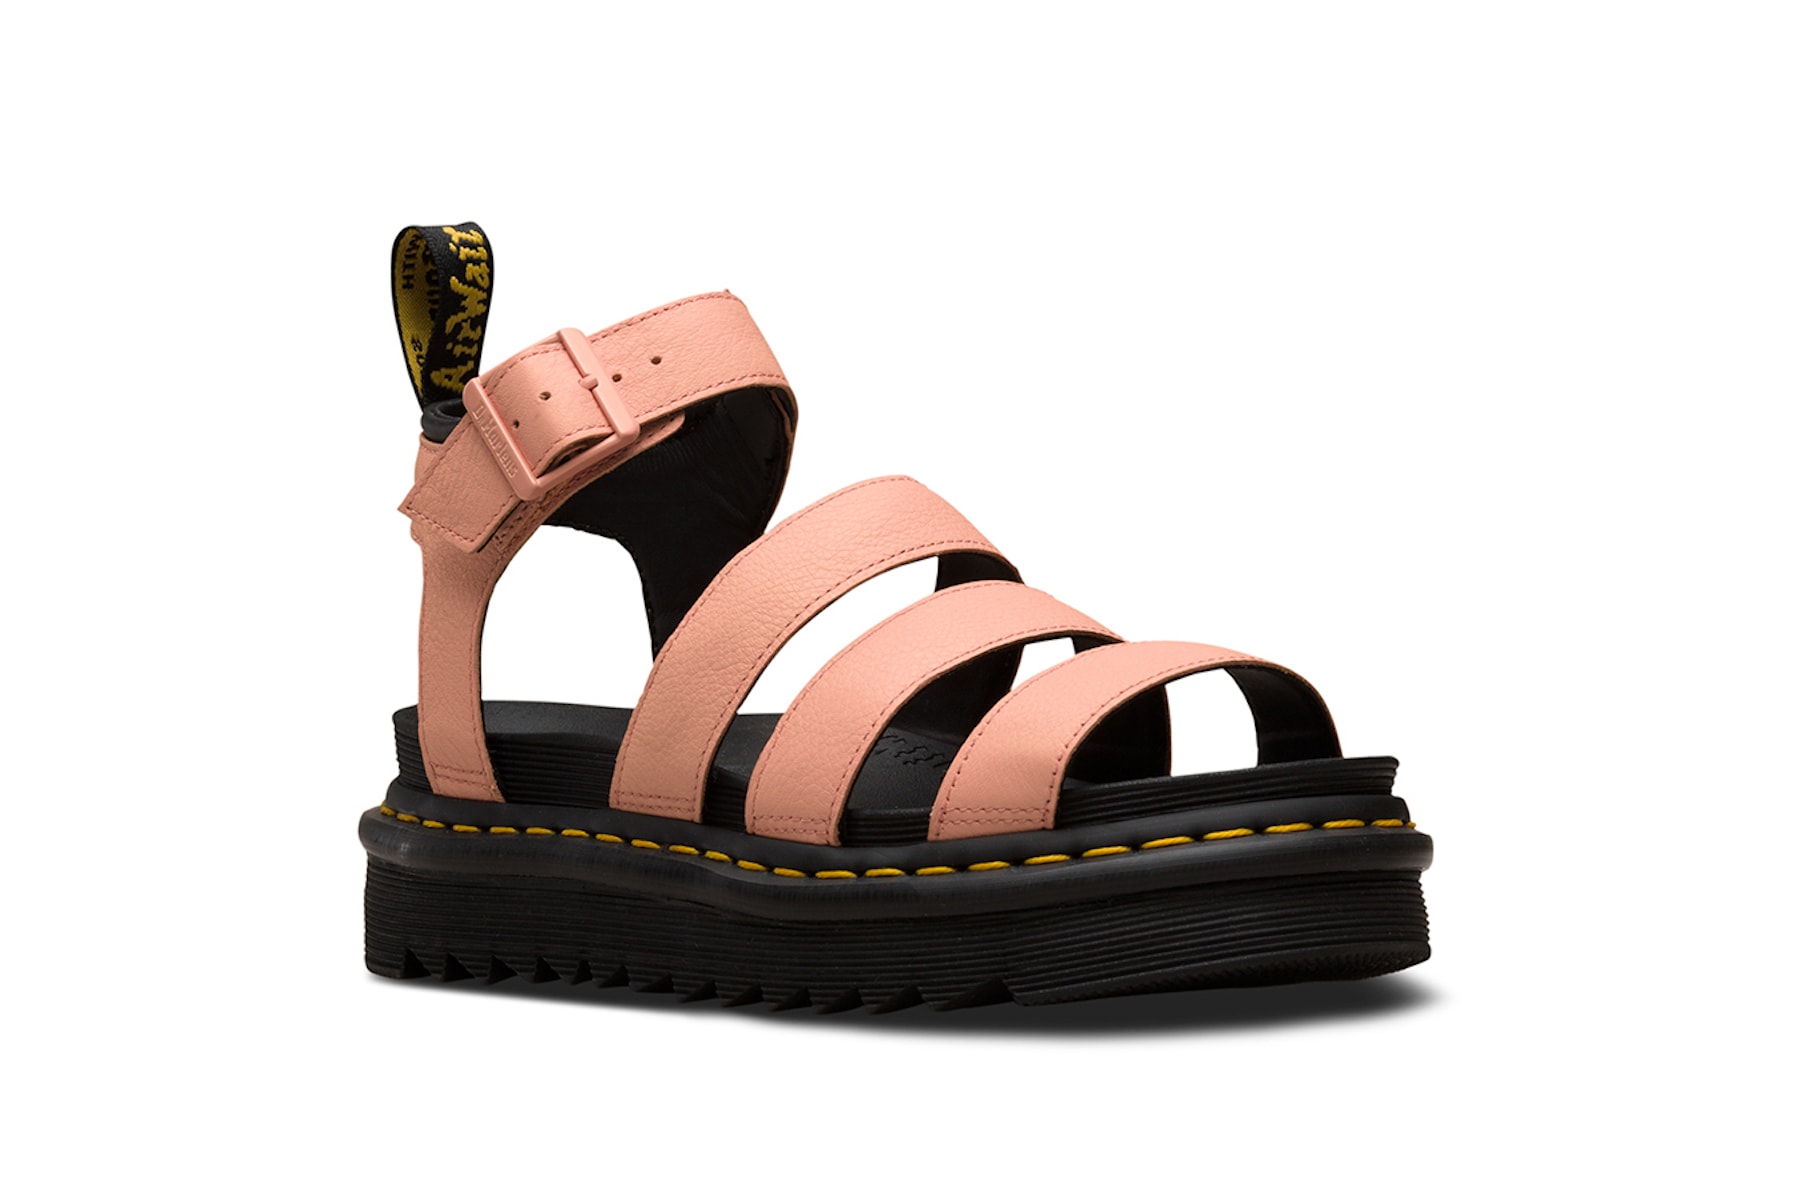 Dr. Martens Sandal Collection Festival Season Shoe Footwear Colorful Leather Silhouettes Straps Summer Concert Outfit Pink Yellow Purple Design Release